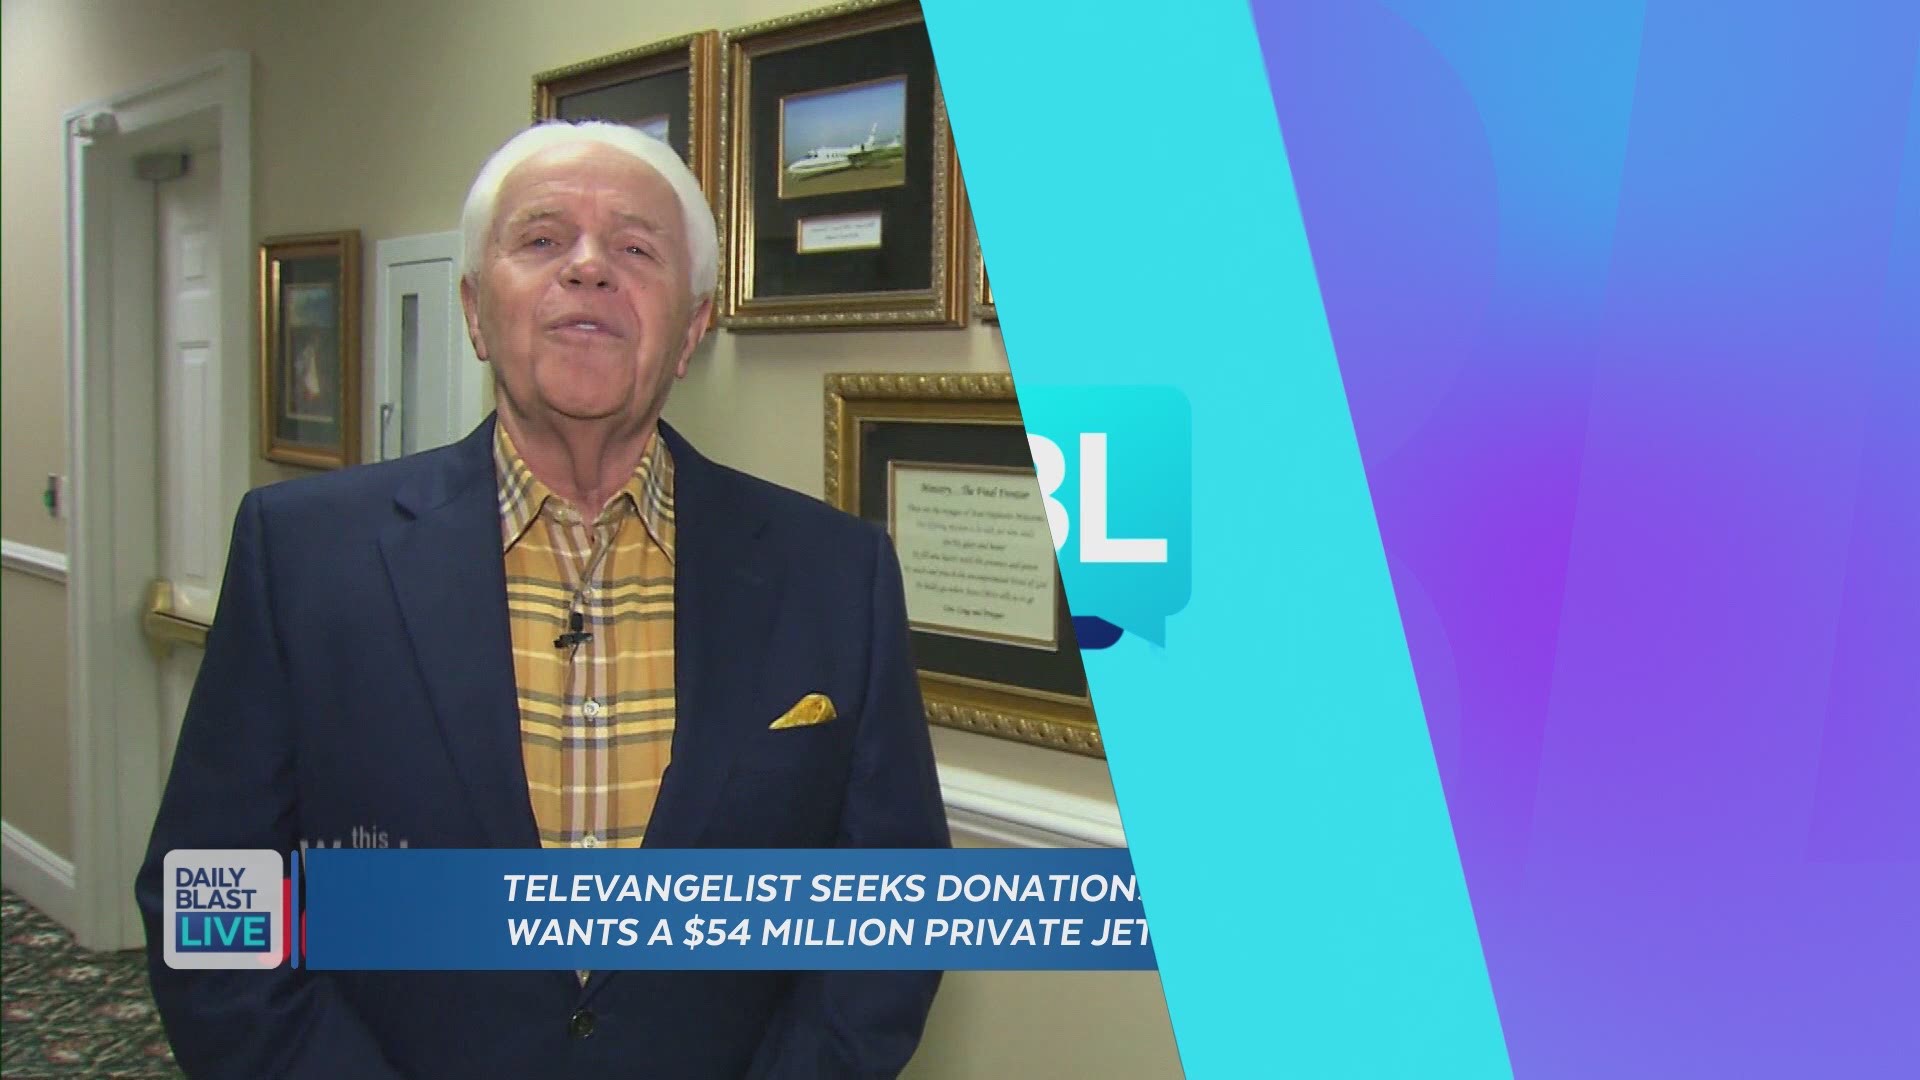 Jesse Duplantis, a 68-year-old Christian minister says his ministry has paid cash for three private jets in the past and is now reportedly seeking the funds for a Dassault Falcon 7X, worth $54 million. In a video posted to his ministries' website, Duplant